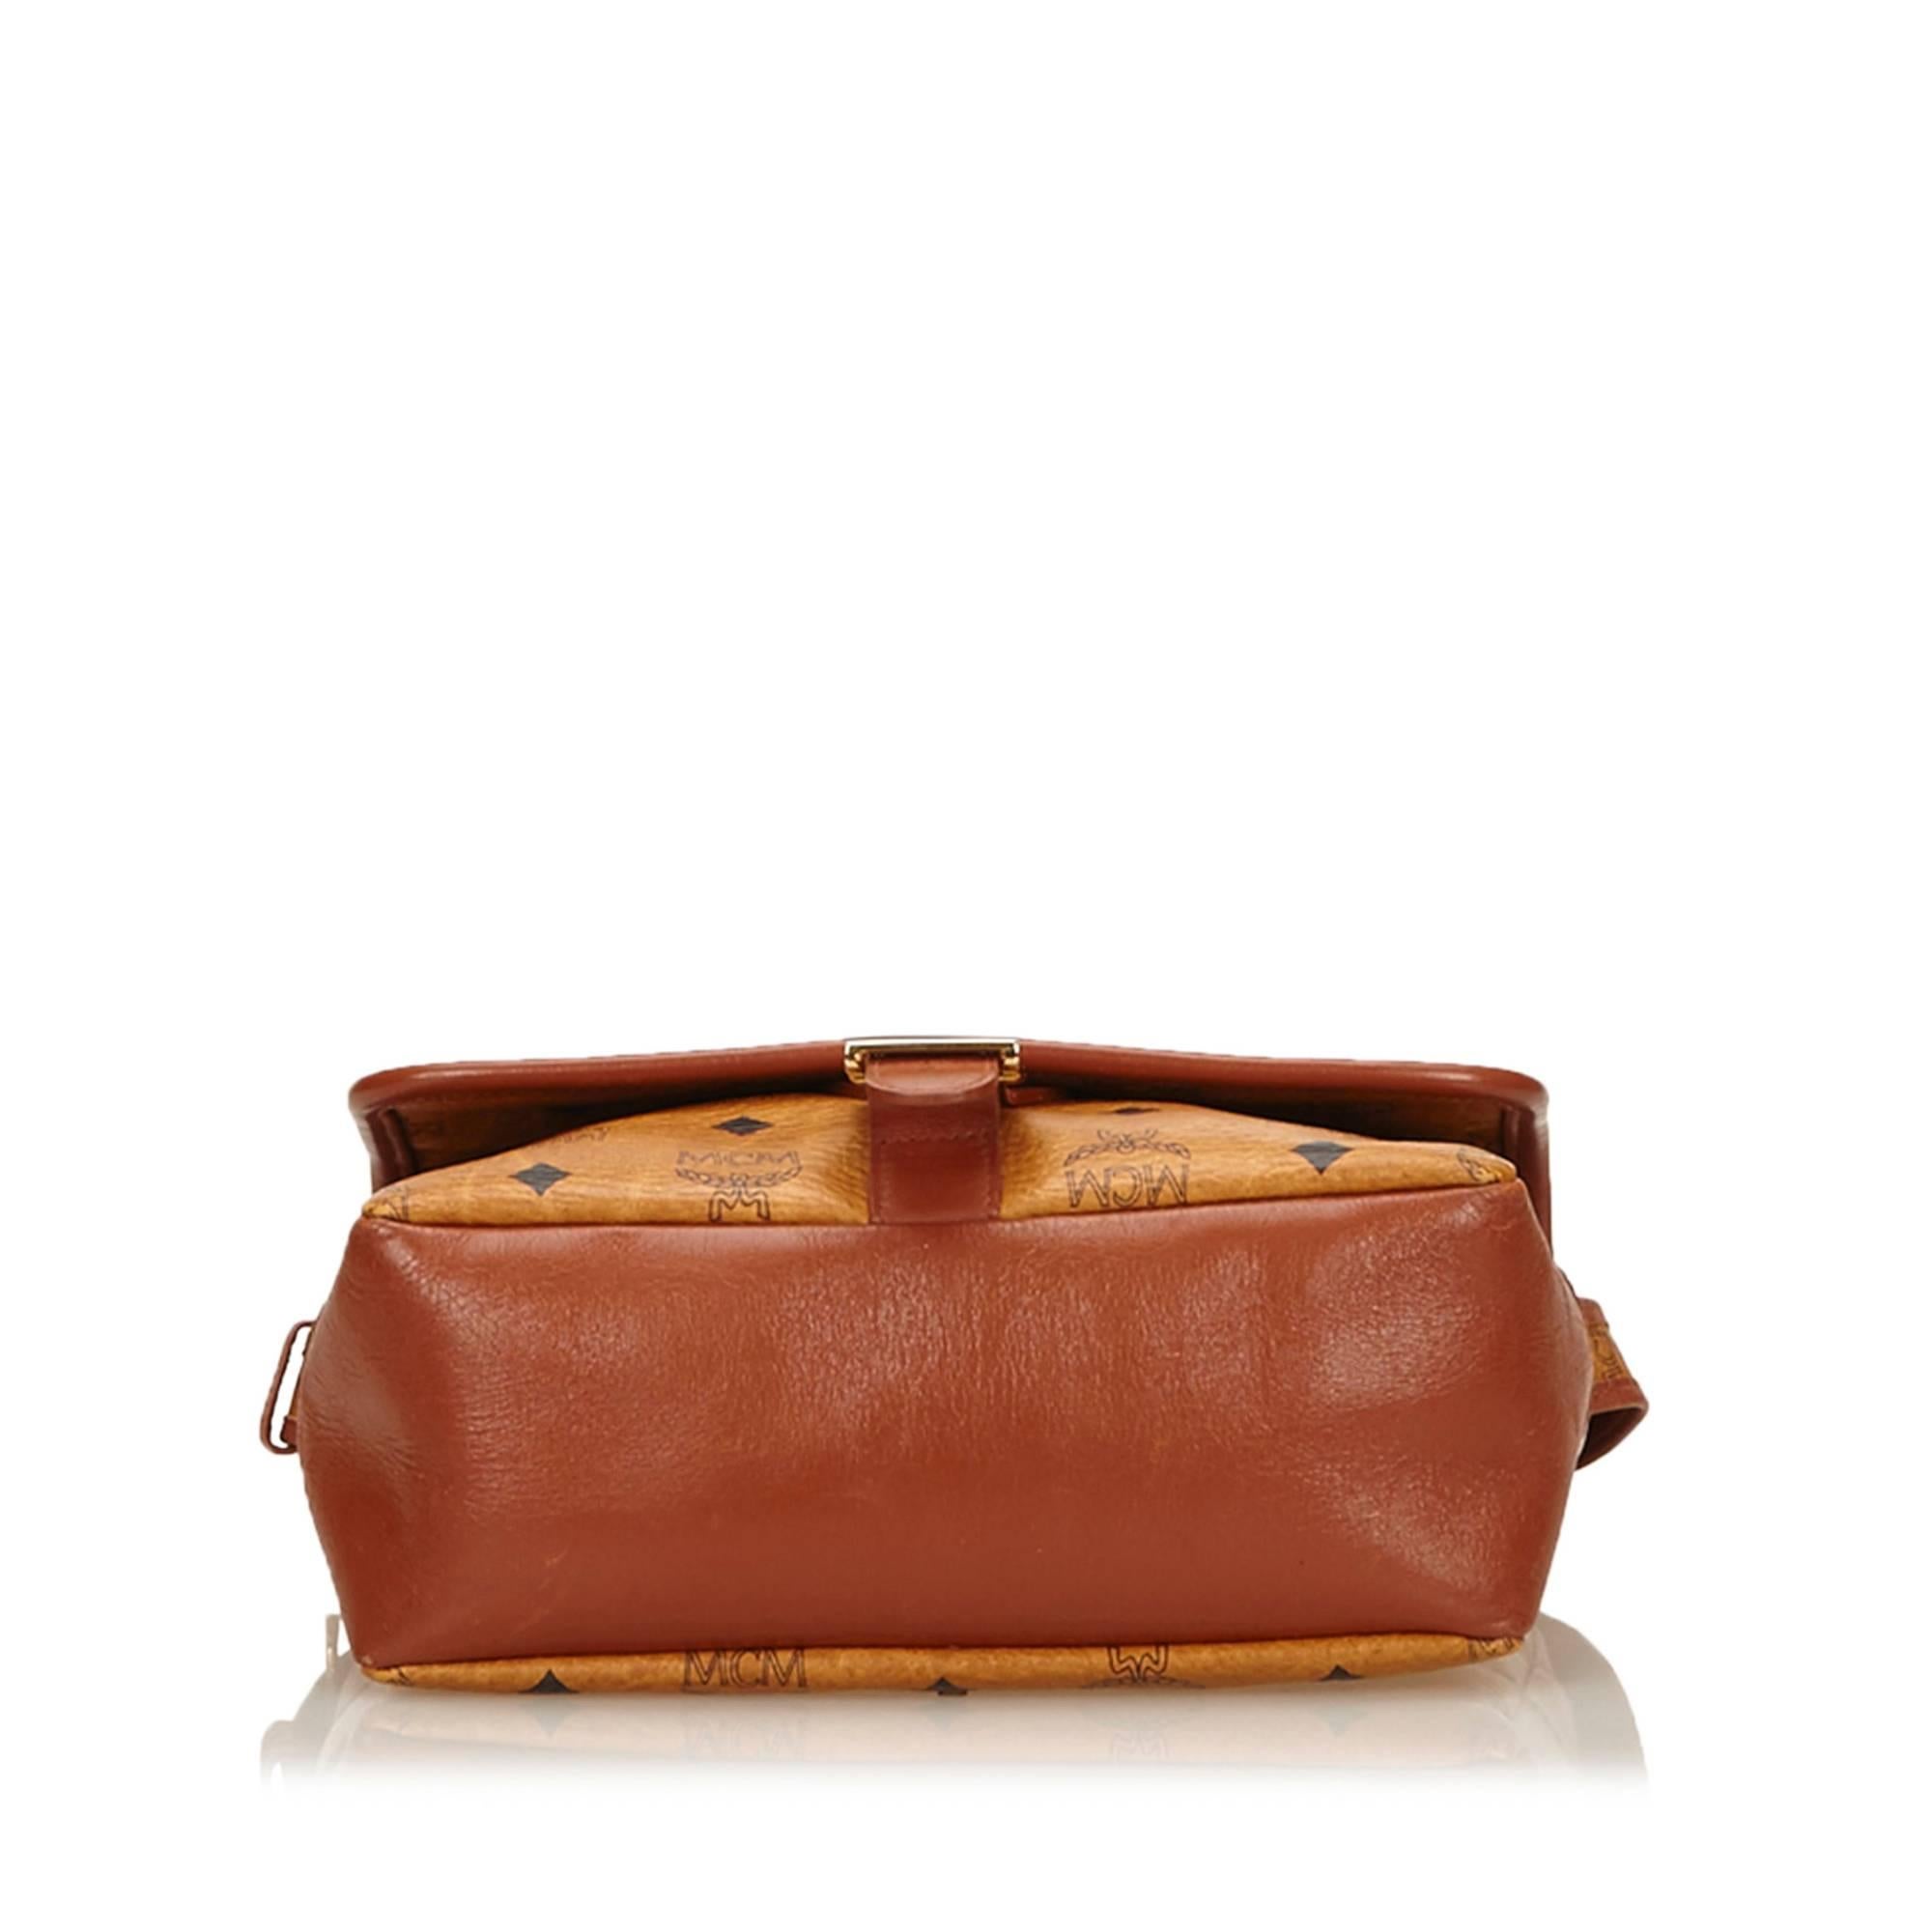 This shoulder bag features a leather body, a flat shoulder strap, a top flap with a belt buckle detail, a top zip closure, and an interior zip pocket.

Color: Brown